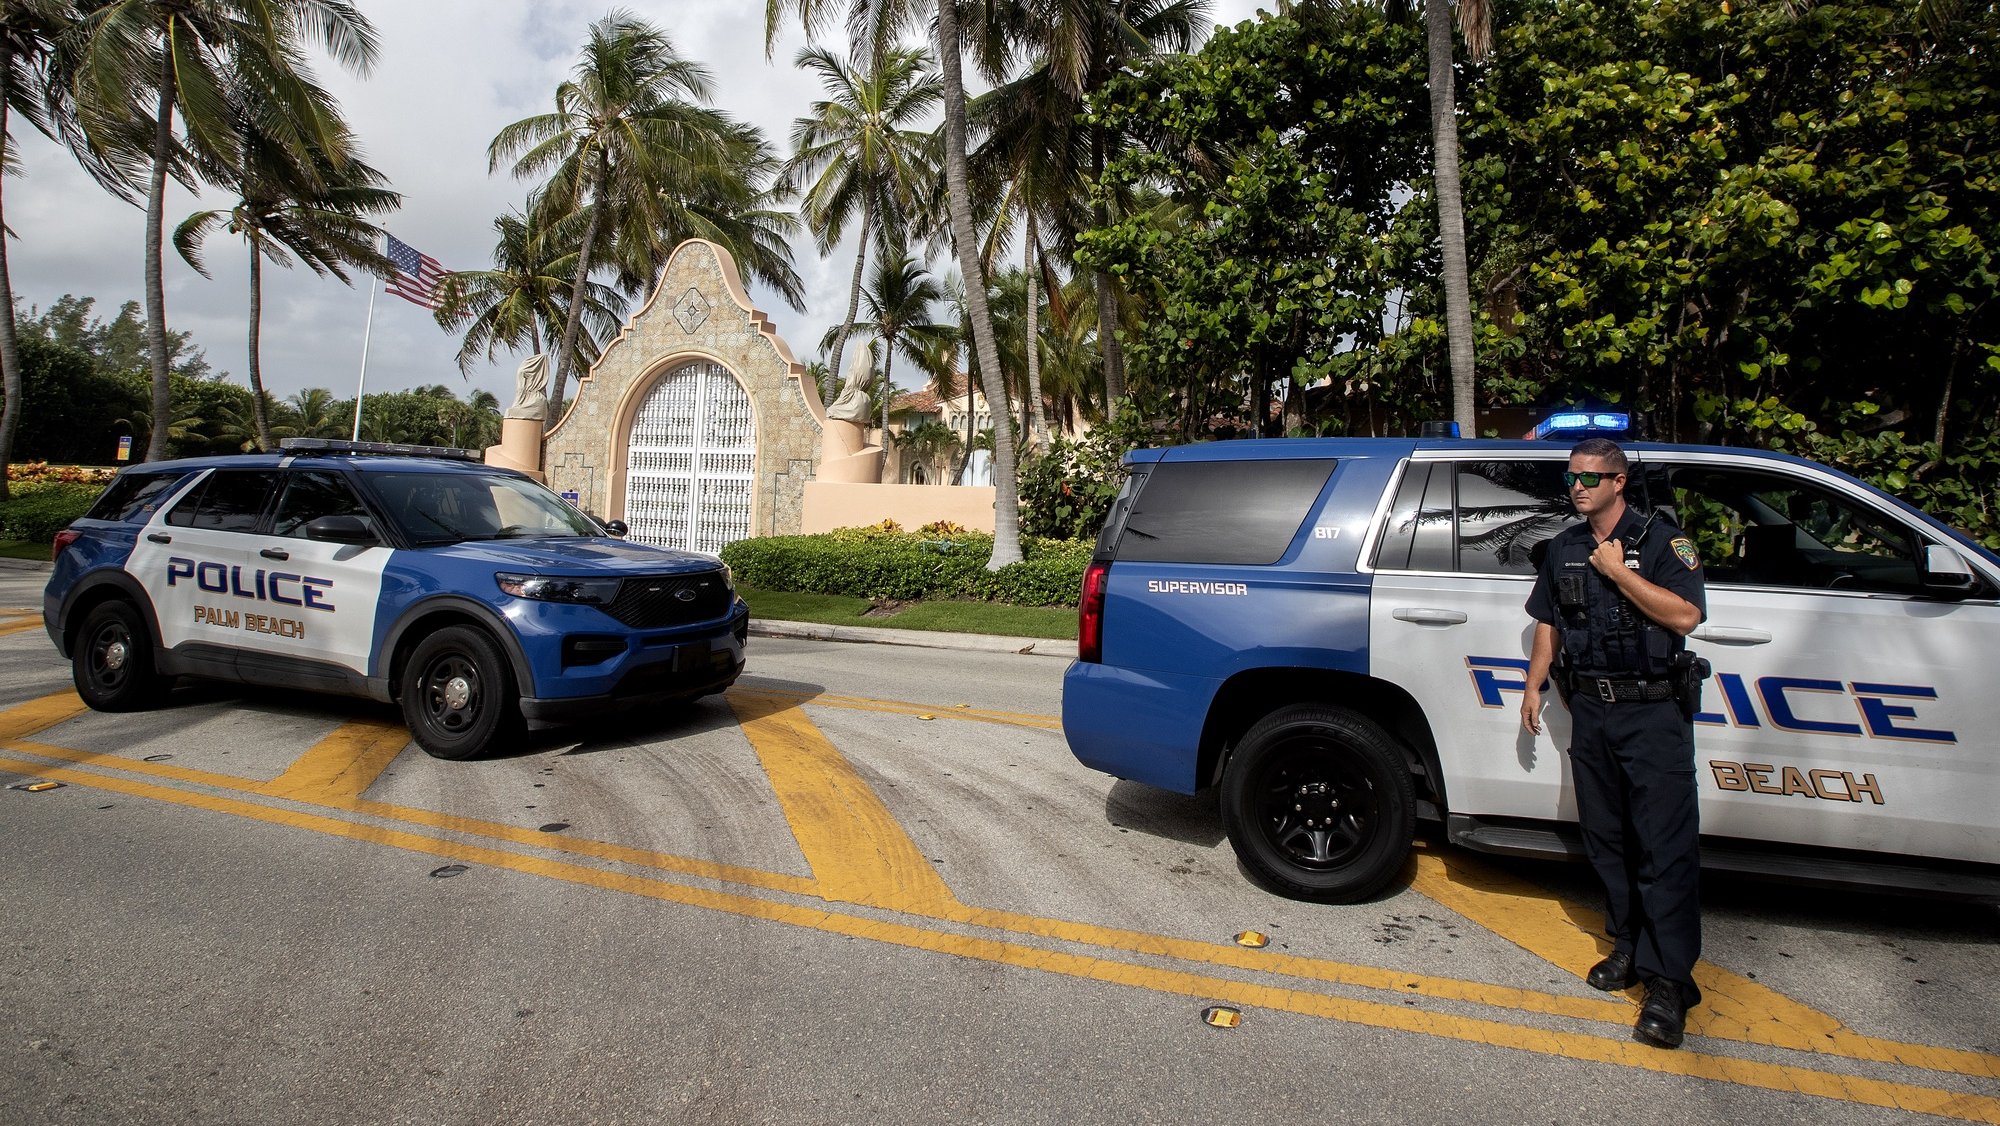 epa10112628 Authorities stand outside Mar-a-Lago, the residence of former president Donald Trump, amid reports of the FBI executing a search warrant as a part of a document investigation, in Palm Beach, Florida, USA, 09 August 2022.  EPA/CRISTOBAL HERRERA-ULASHKEVICH